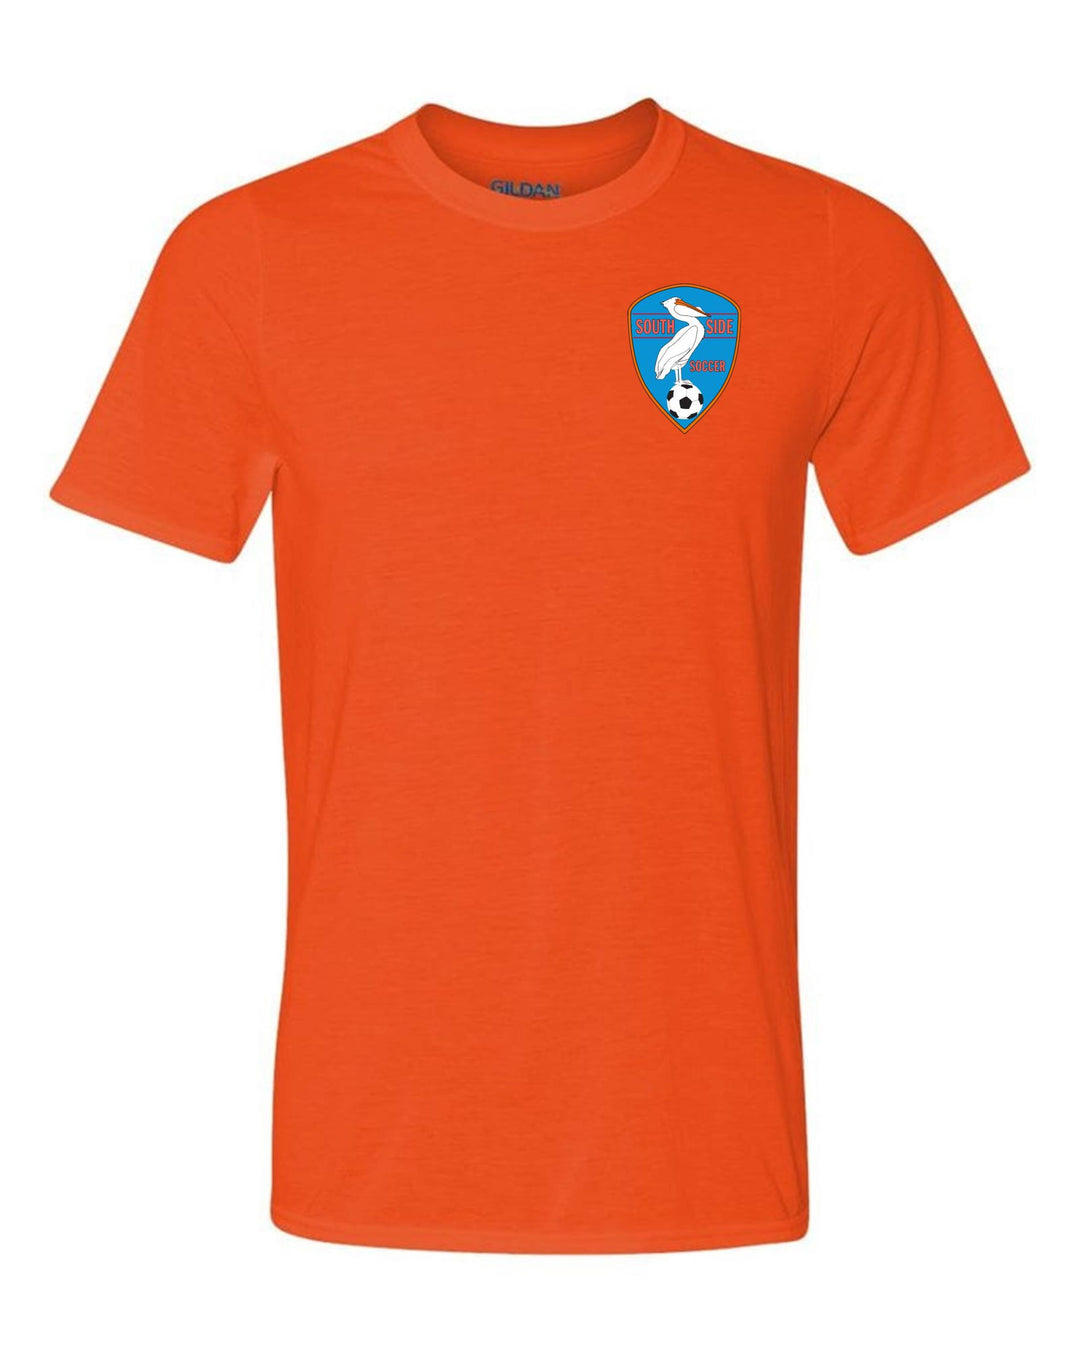 Southside Youth Soccer Short Sleeve T-Shirt SYS Spiritwear ORANGE YOUTH SMALL - Third Coast Soccer